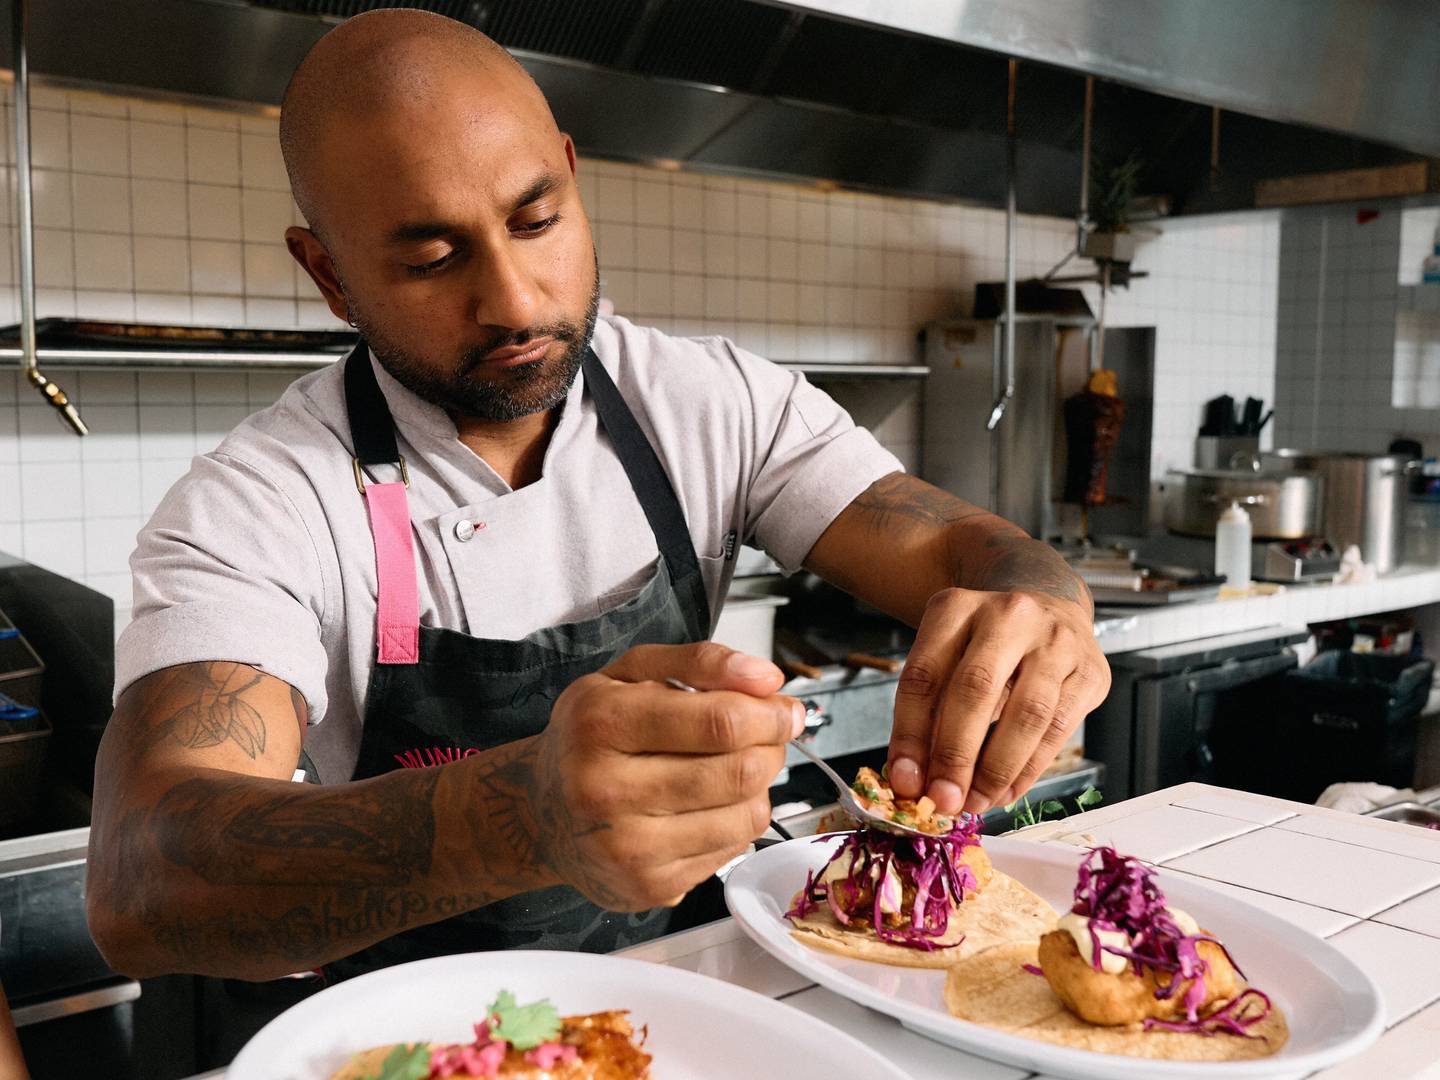 Chef Ashish Alfred, who rose to prominence with Duck Duck Goose in Fells Point, is pictured working in collaboration with Tacombi taqueria.